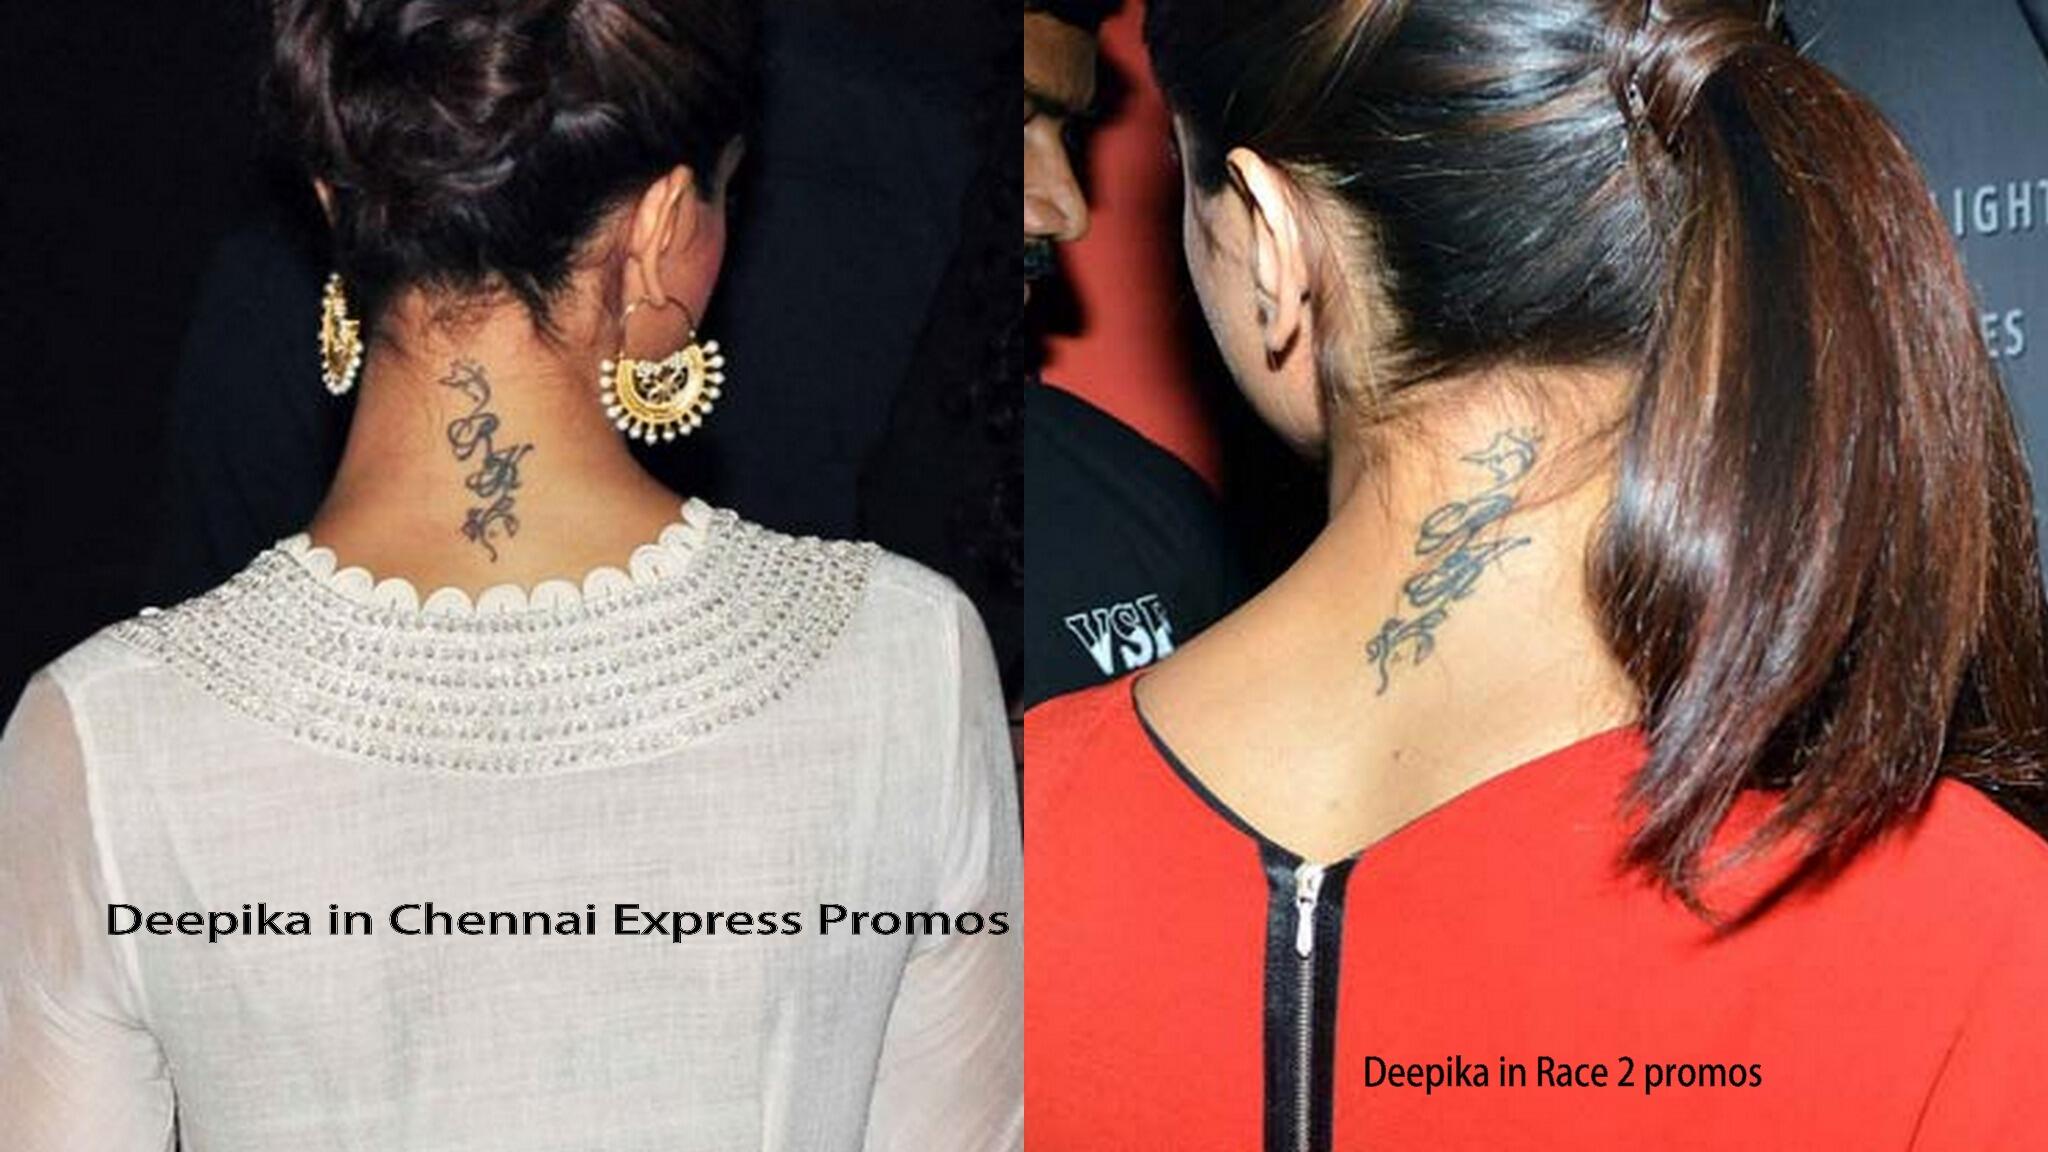 Deepika Padukones Ranbir Kapoor tattoo appears faint at the Cannes red  carpet has she lasered it  Entertainment News Times Now